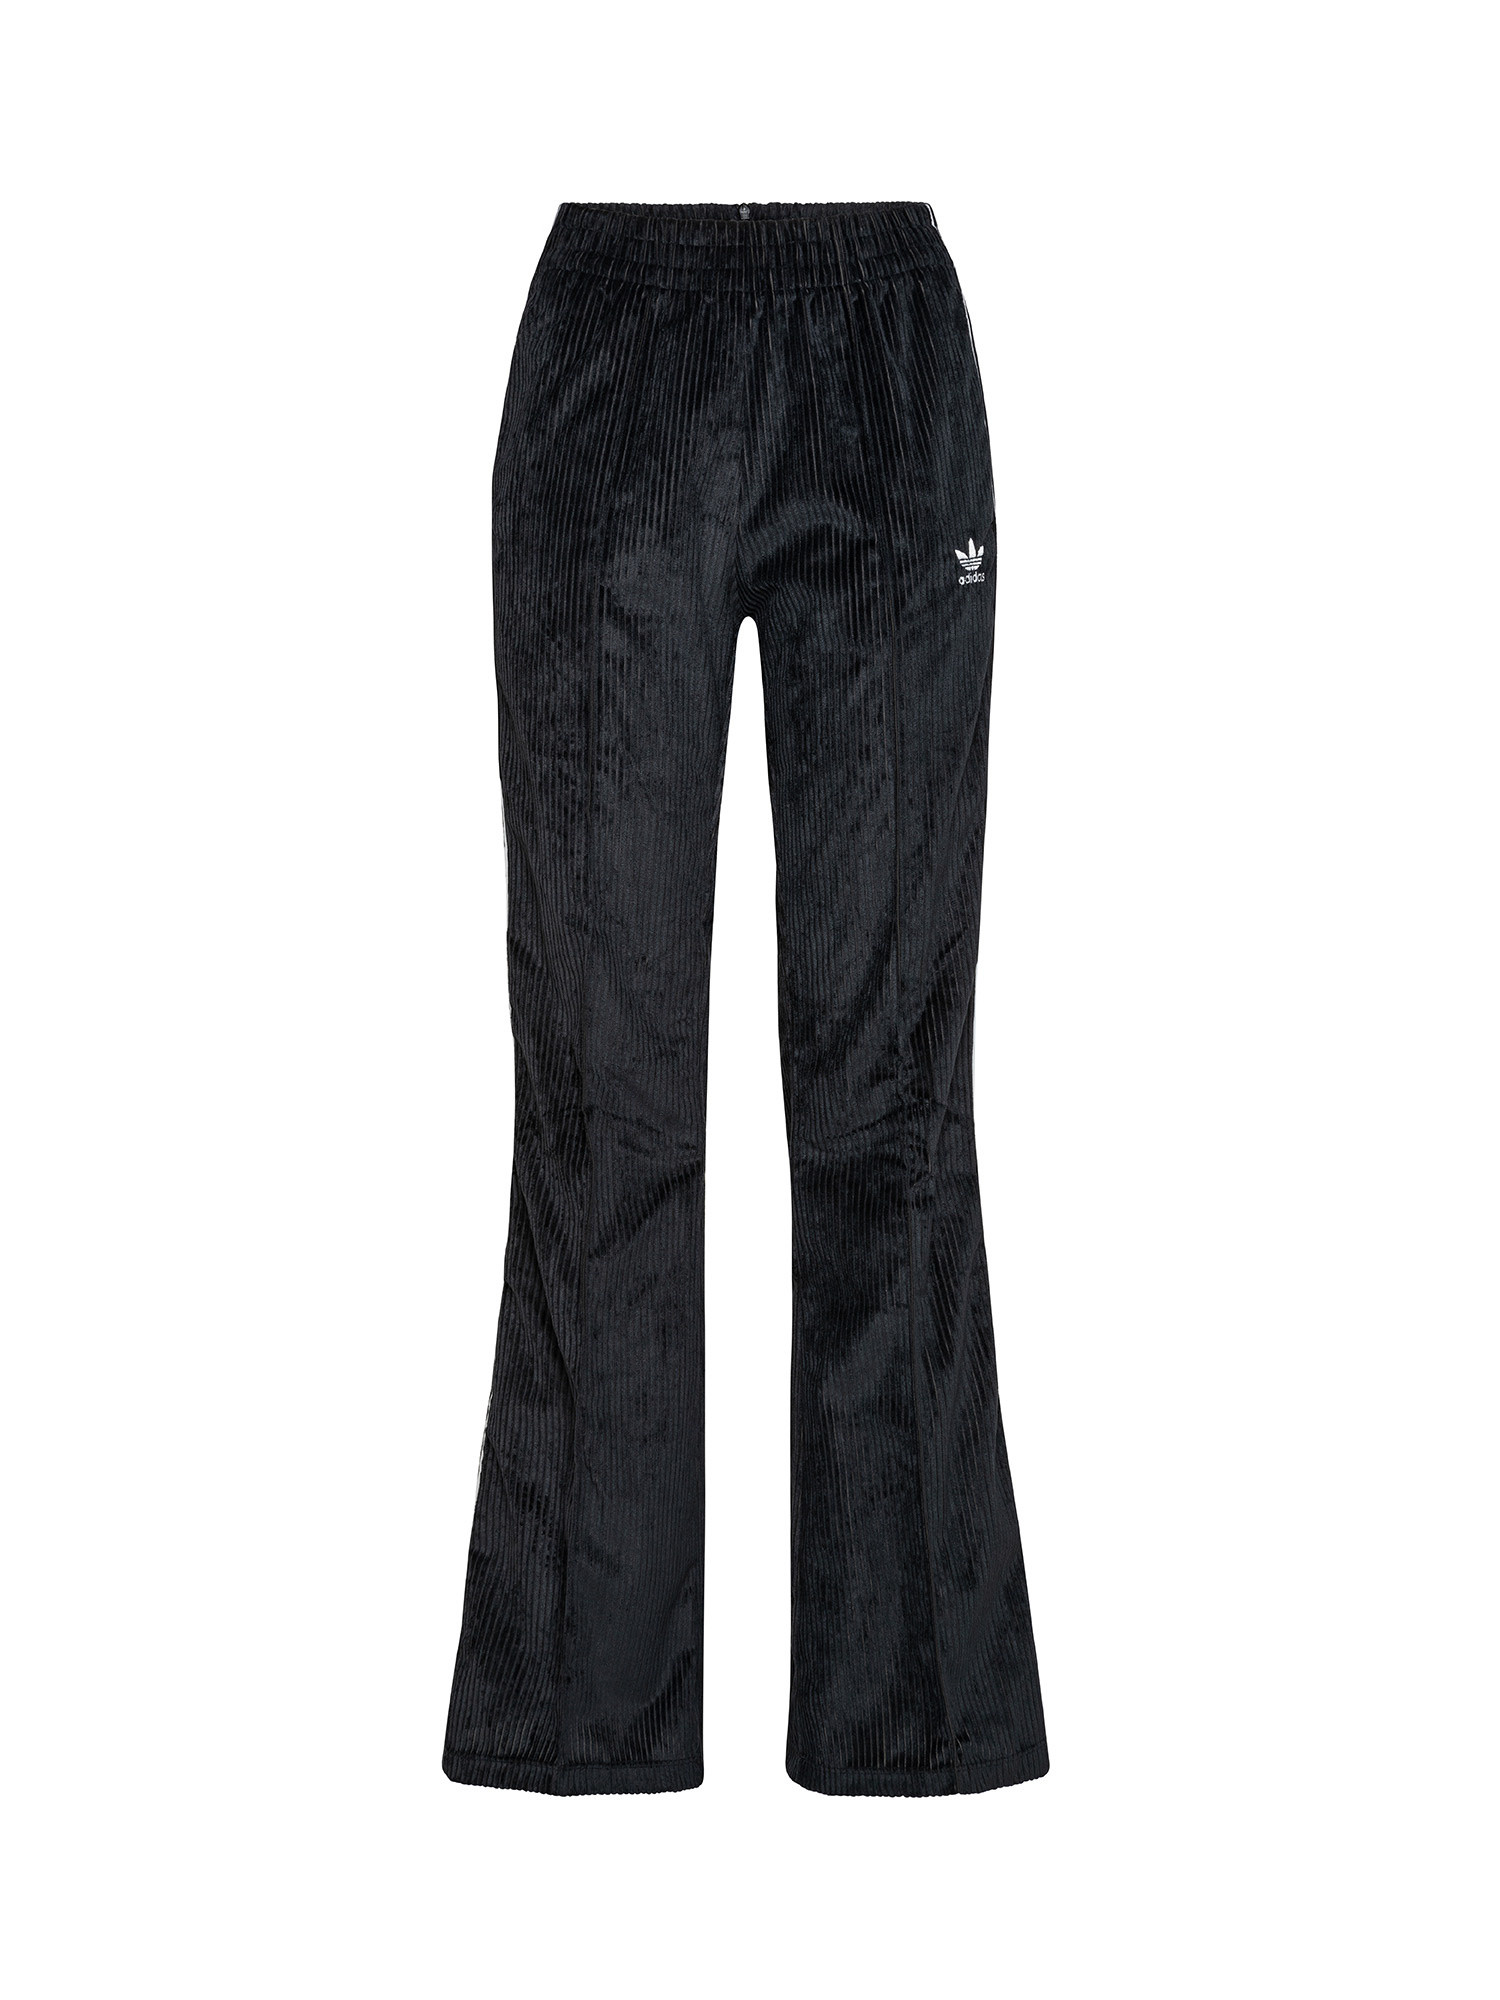 Relaxed Pant, Nero, large image number 0